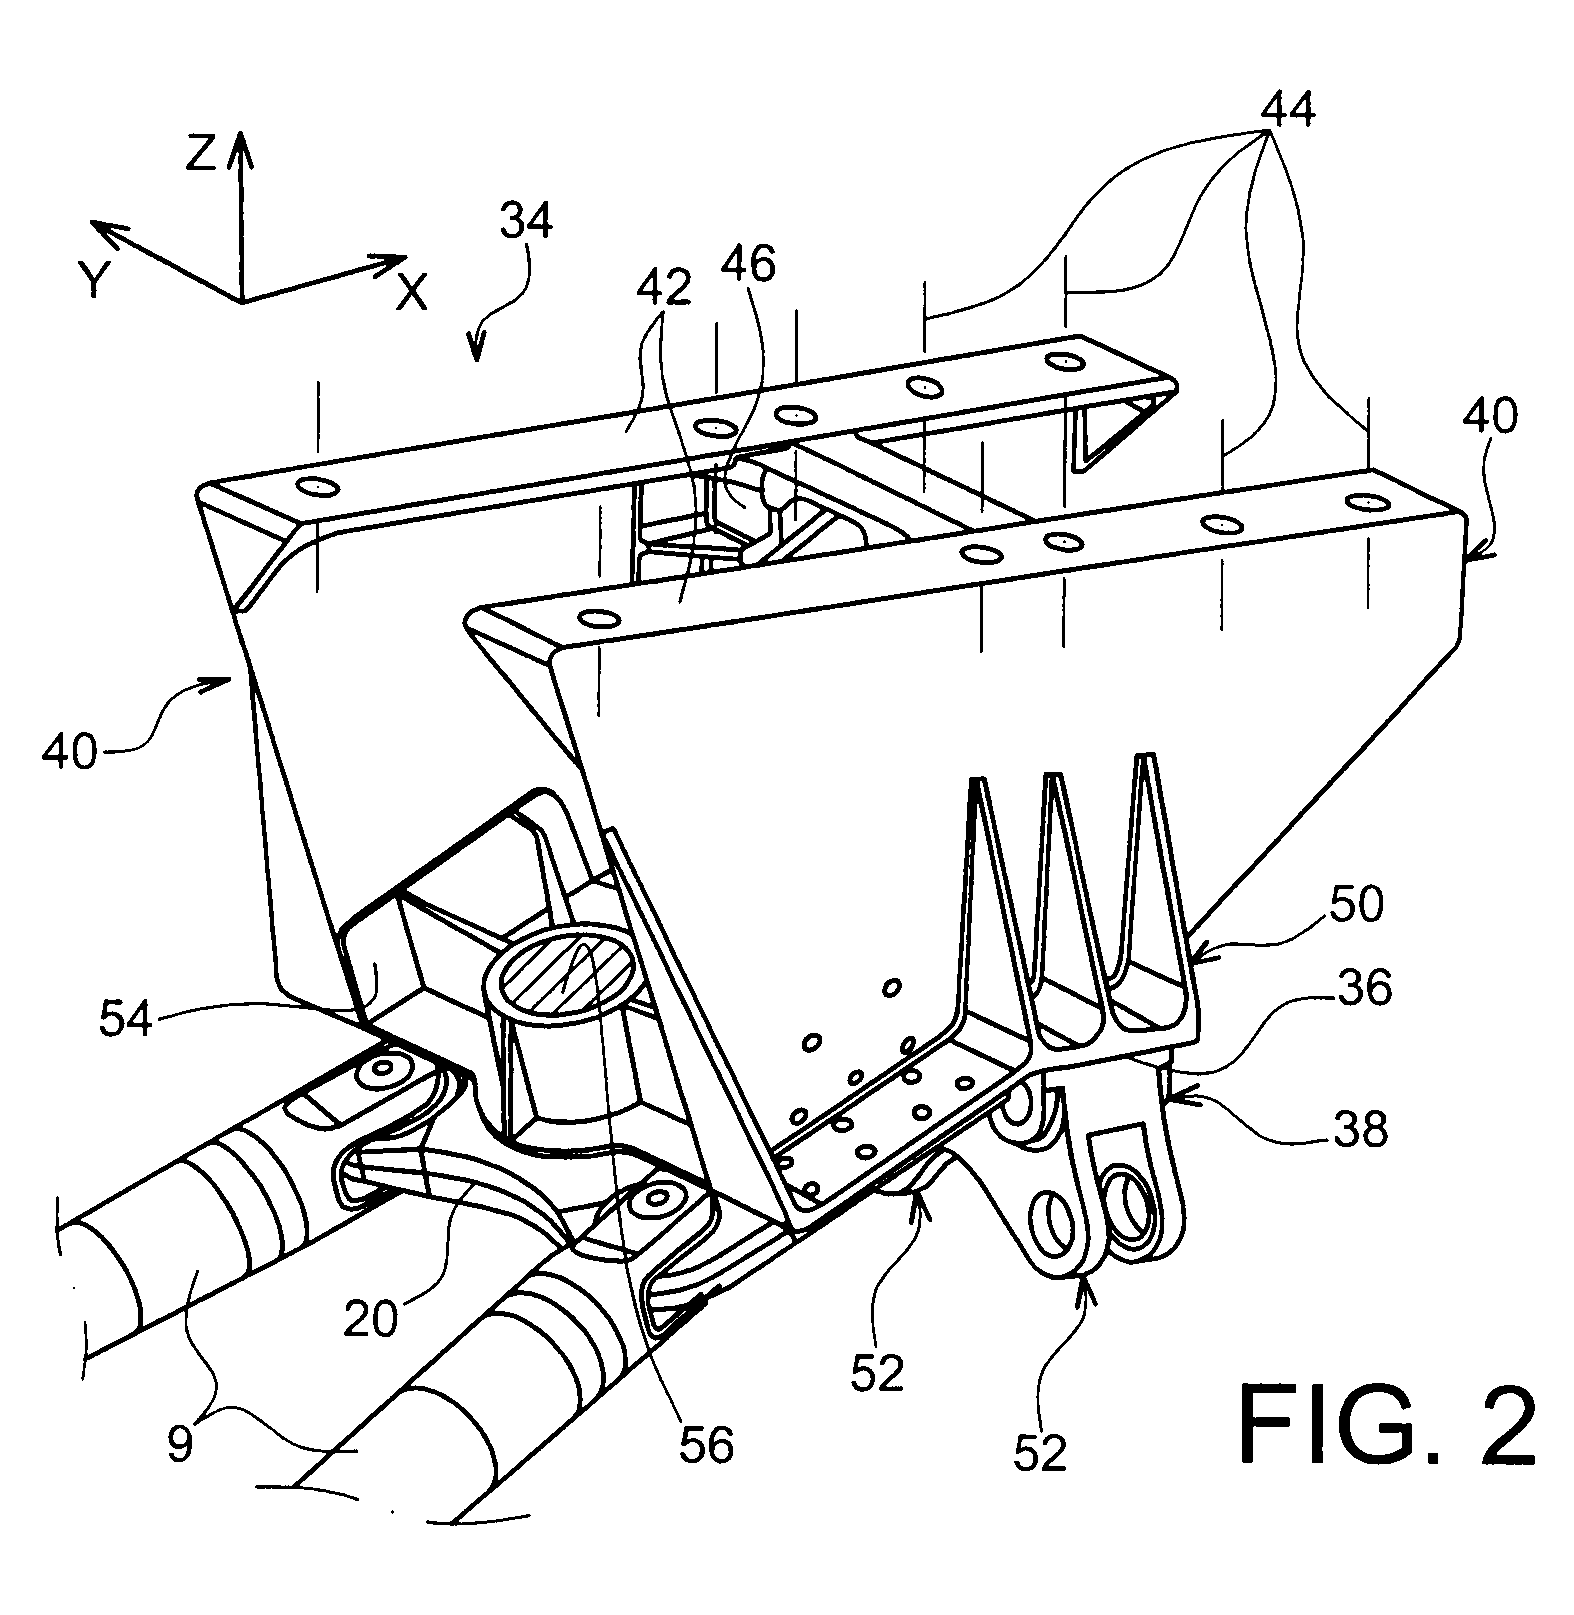 Mounting assembly for securing an engine to an aircraft wing